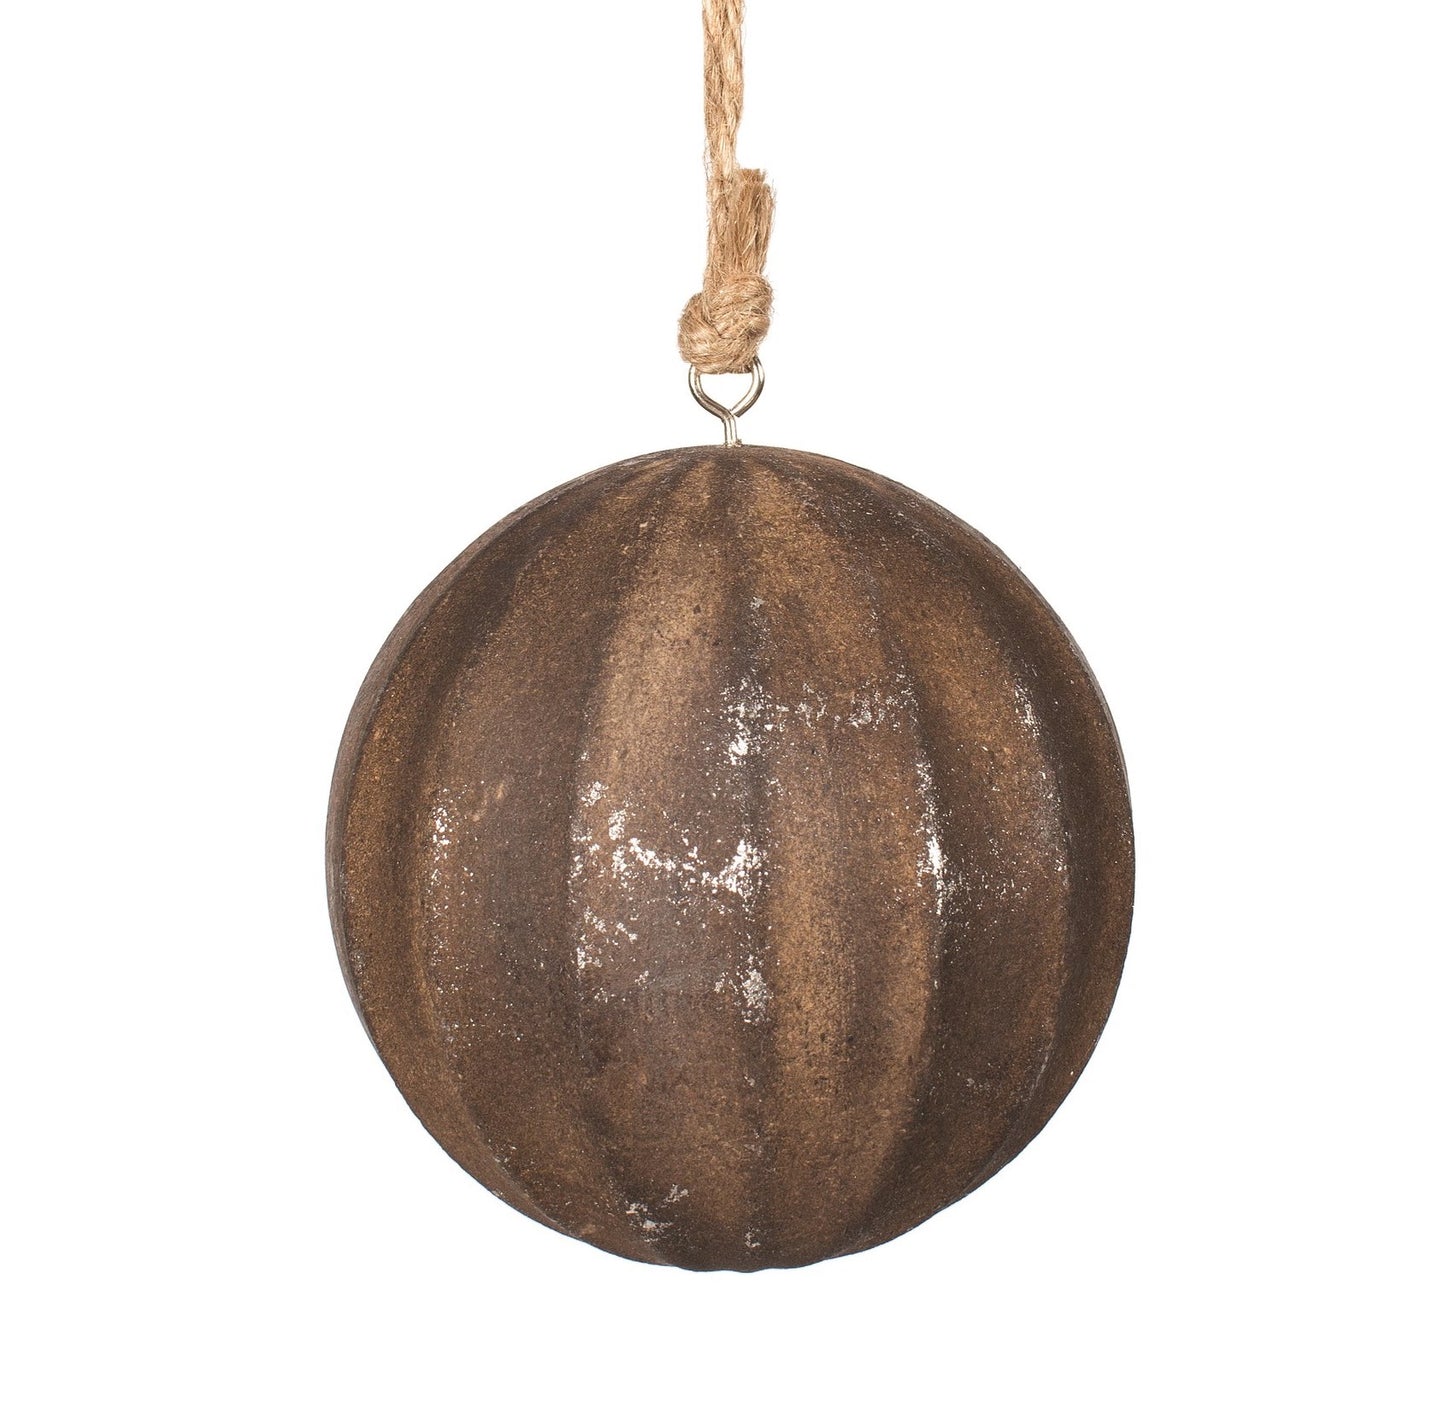 Wood Ball Ornament with Silver Foil 4"